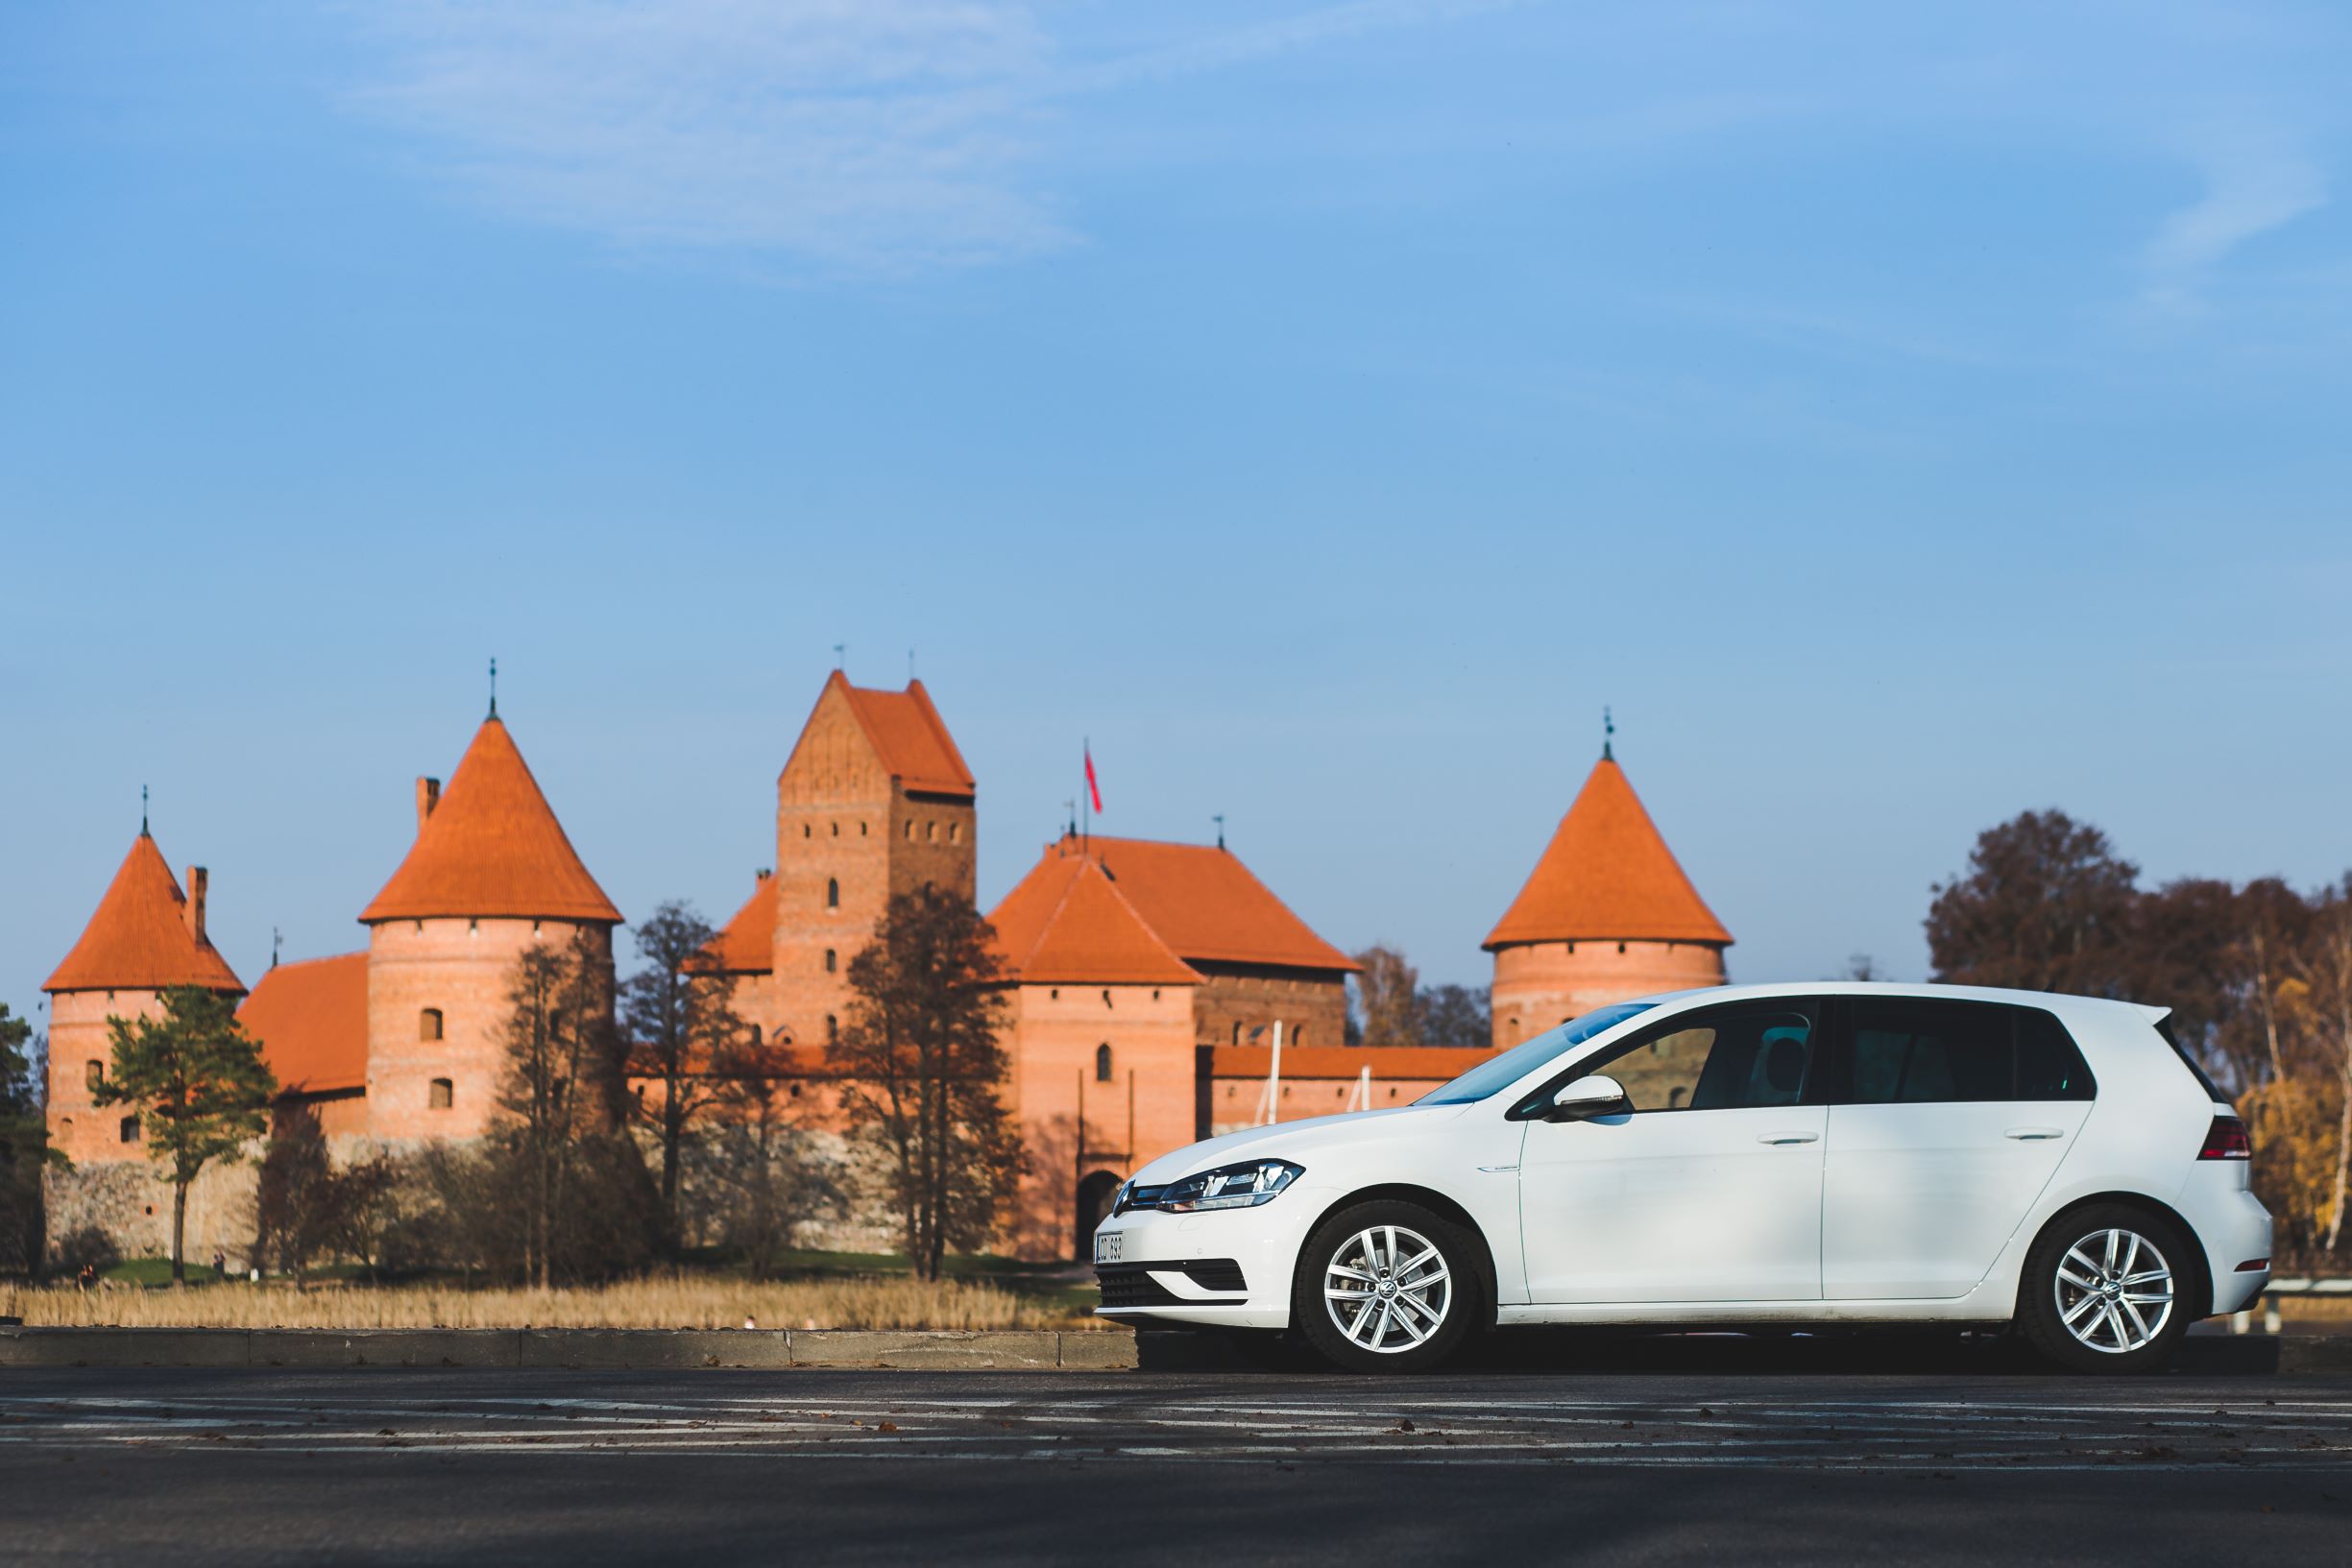 A car from Autocom Car Rental in front of Trakai castle